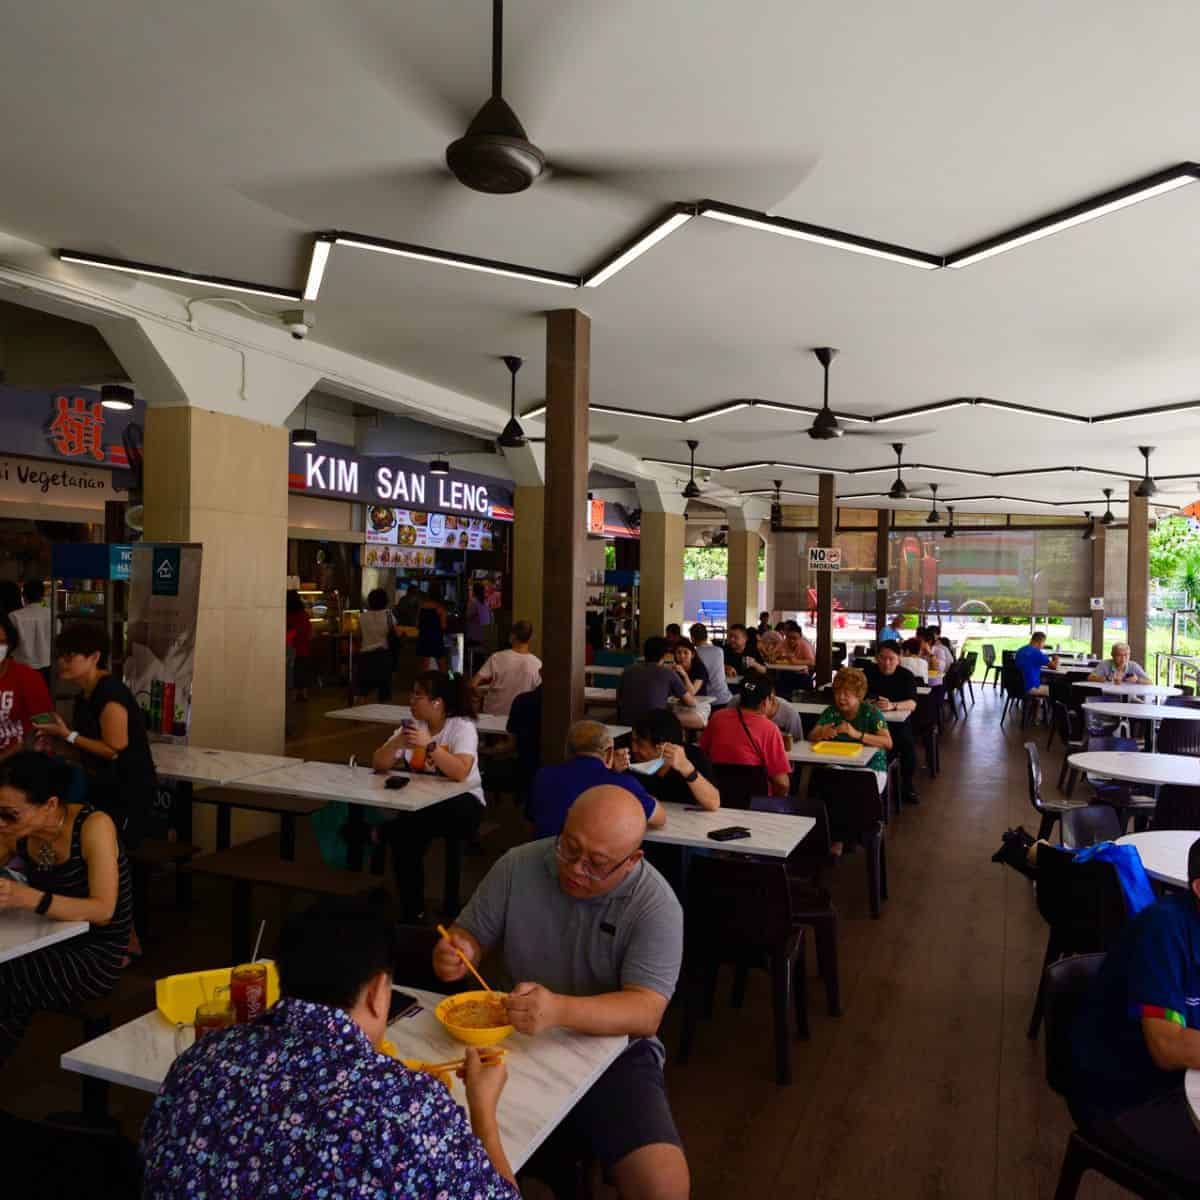 Hawker Centre in Singapore Kim San Leng with various customers eating